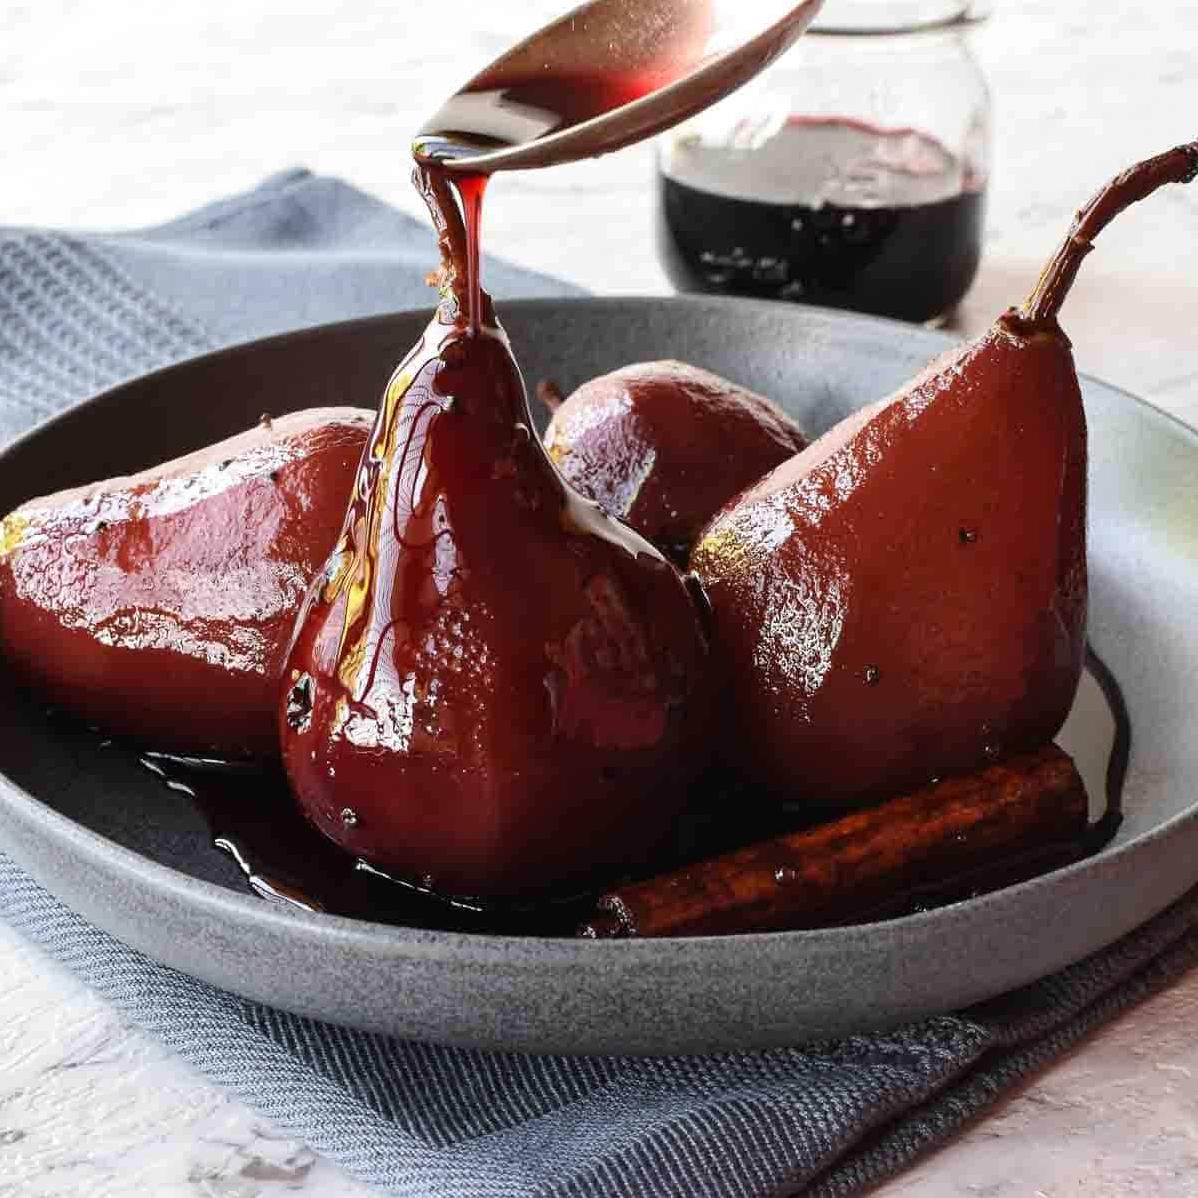  These wine-poached pears make a mouthwatering and impressive dessert for any occasion.